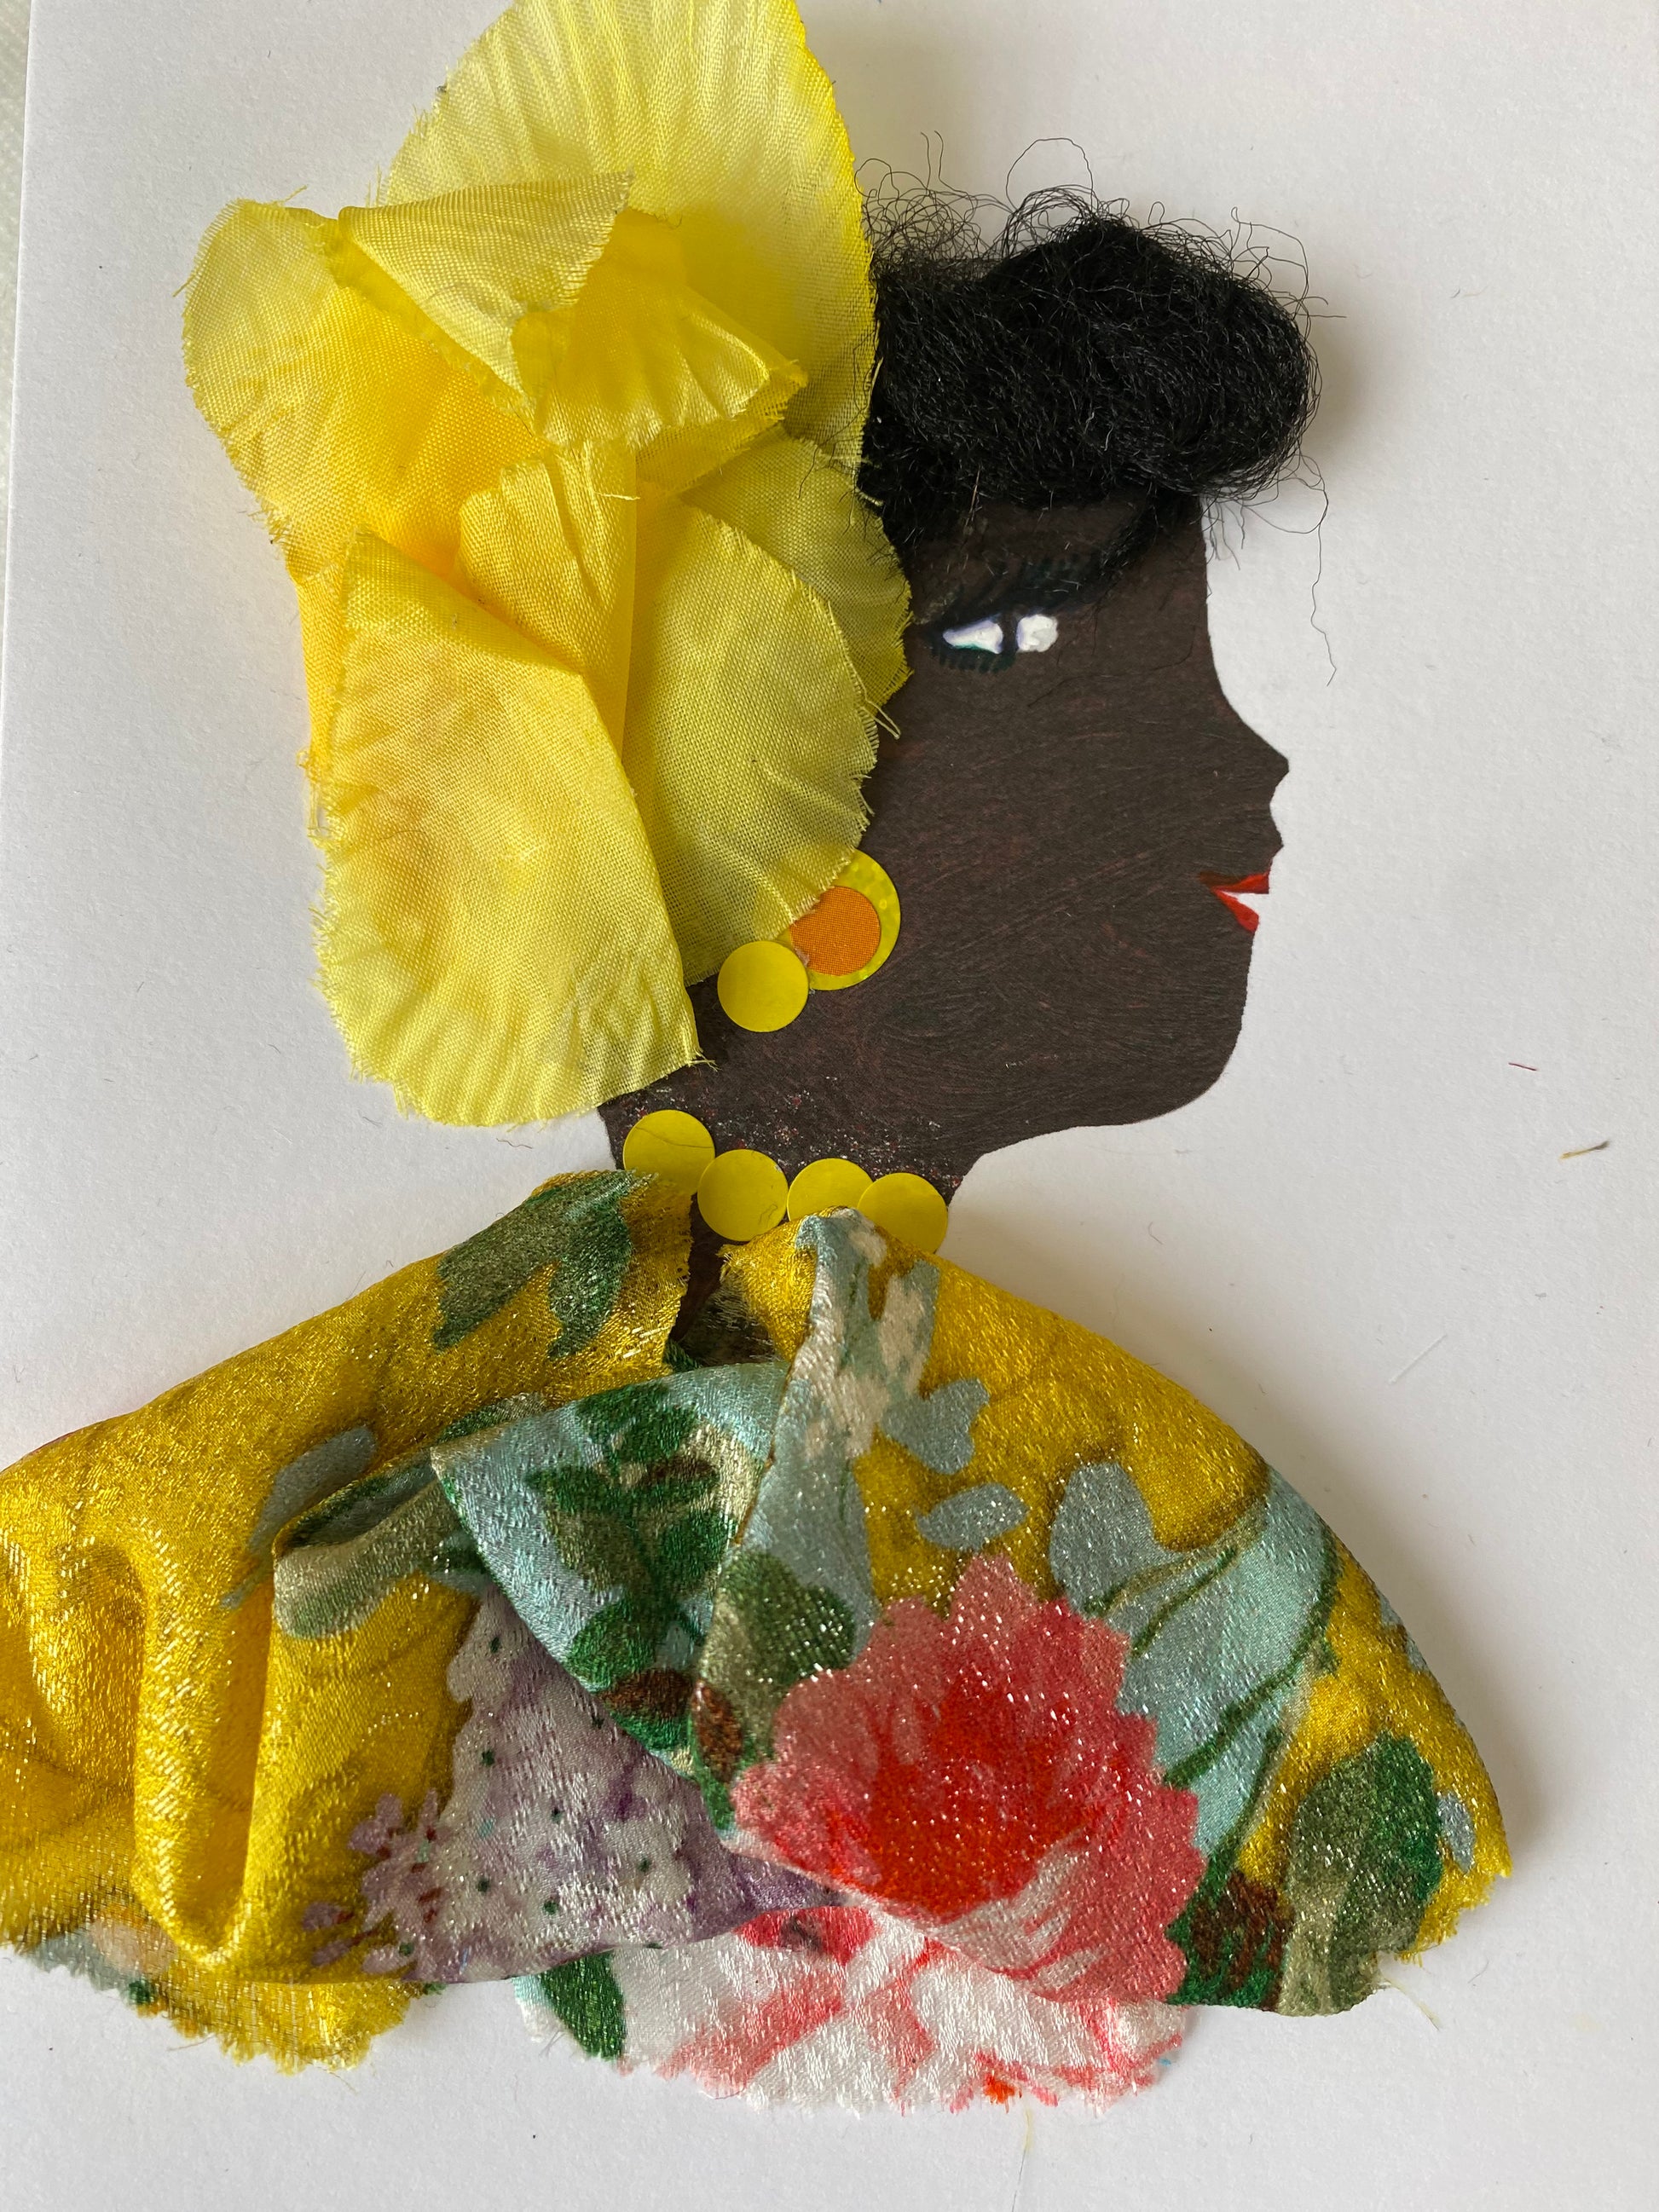 I designed this card of a woman named Delilah Diligent. She has a black skin tone and is wearing a charming yellow hat. She wears a yellow floral blouse. She wears stunning yellow jewellery.